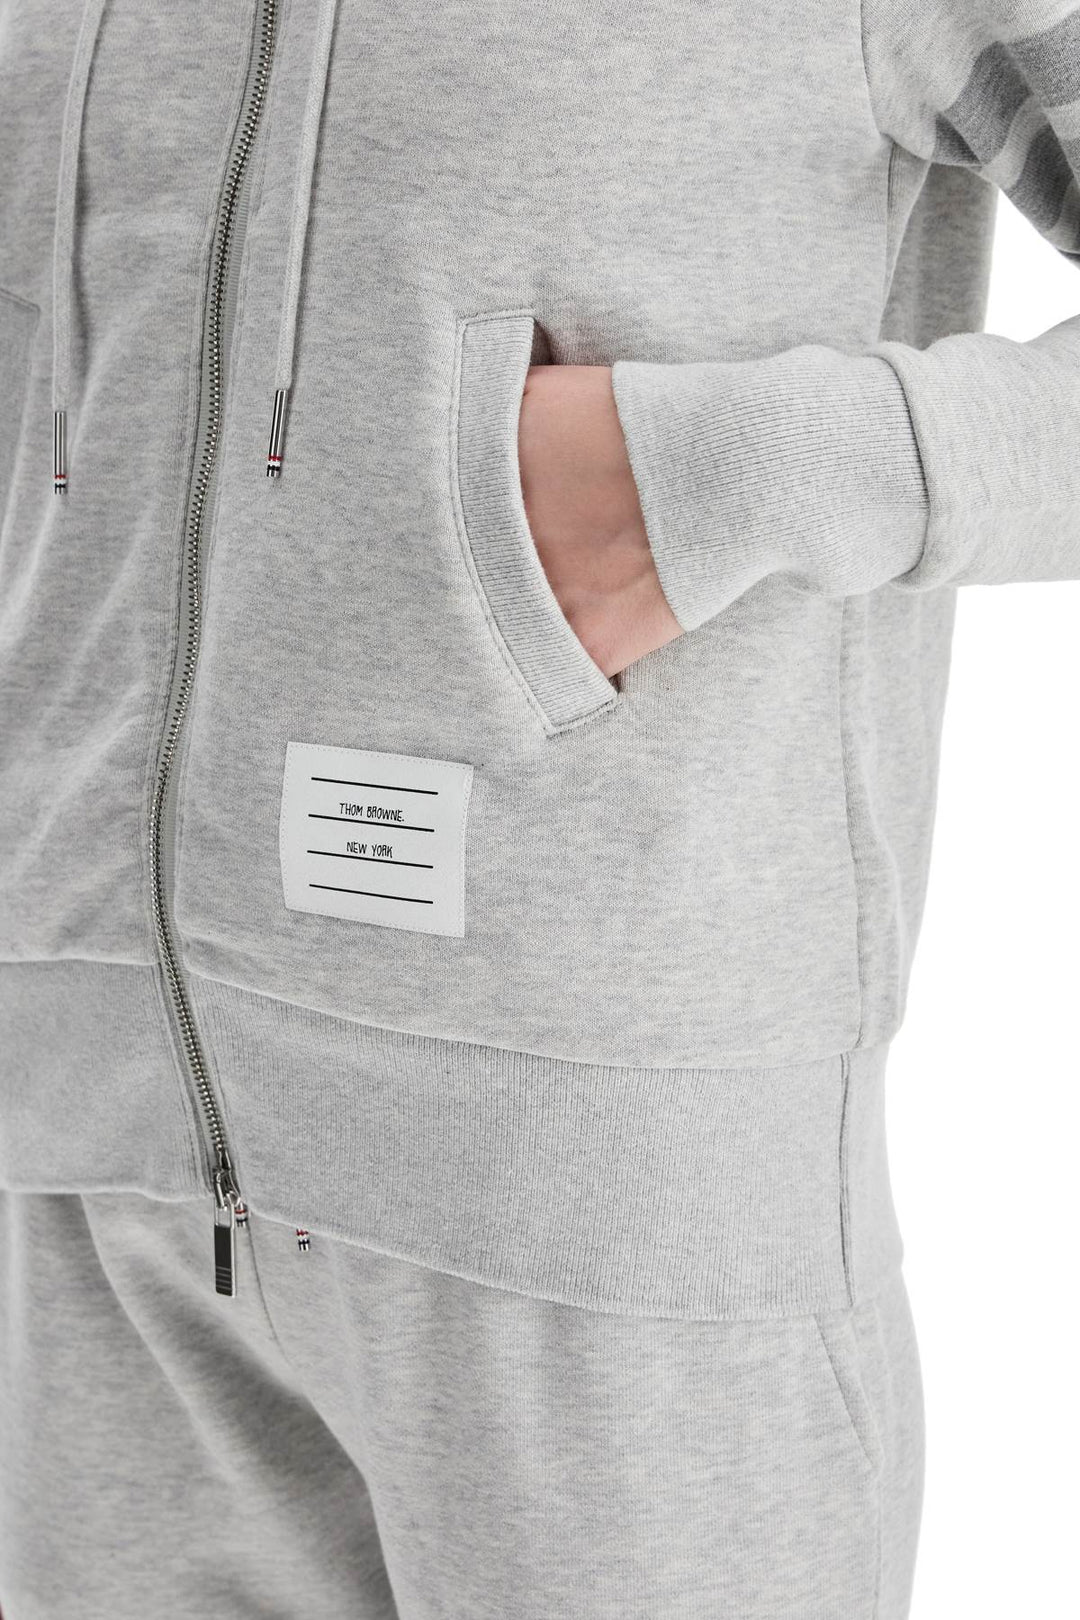 Thom Browne 4 Bar Hoodie With Zipper And   Grey